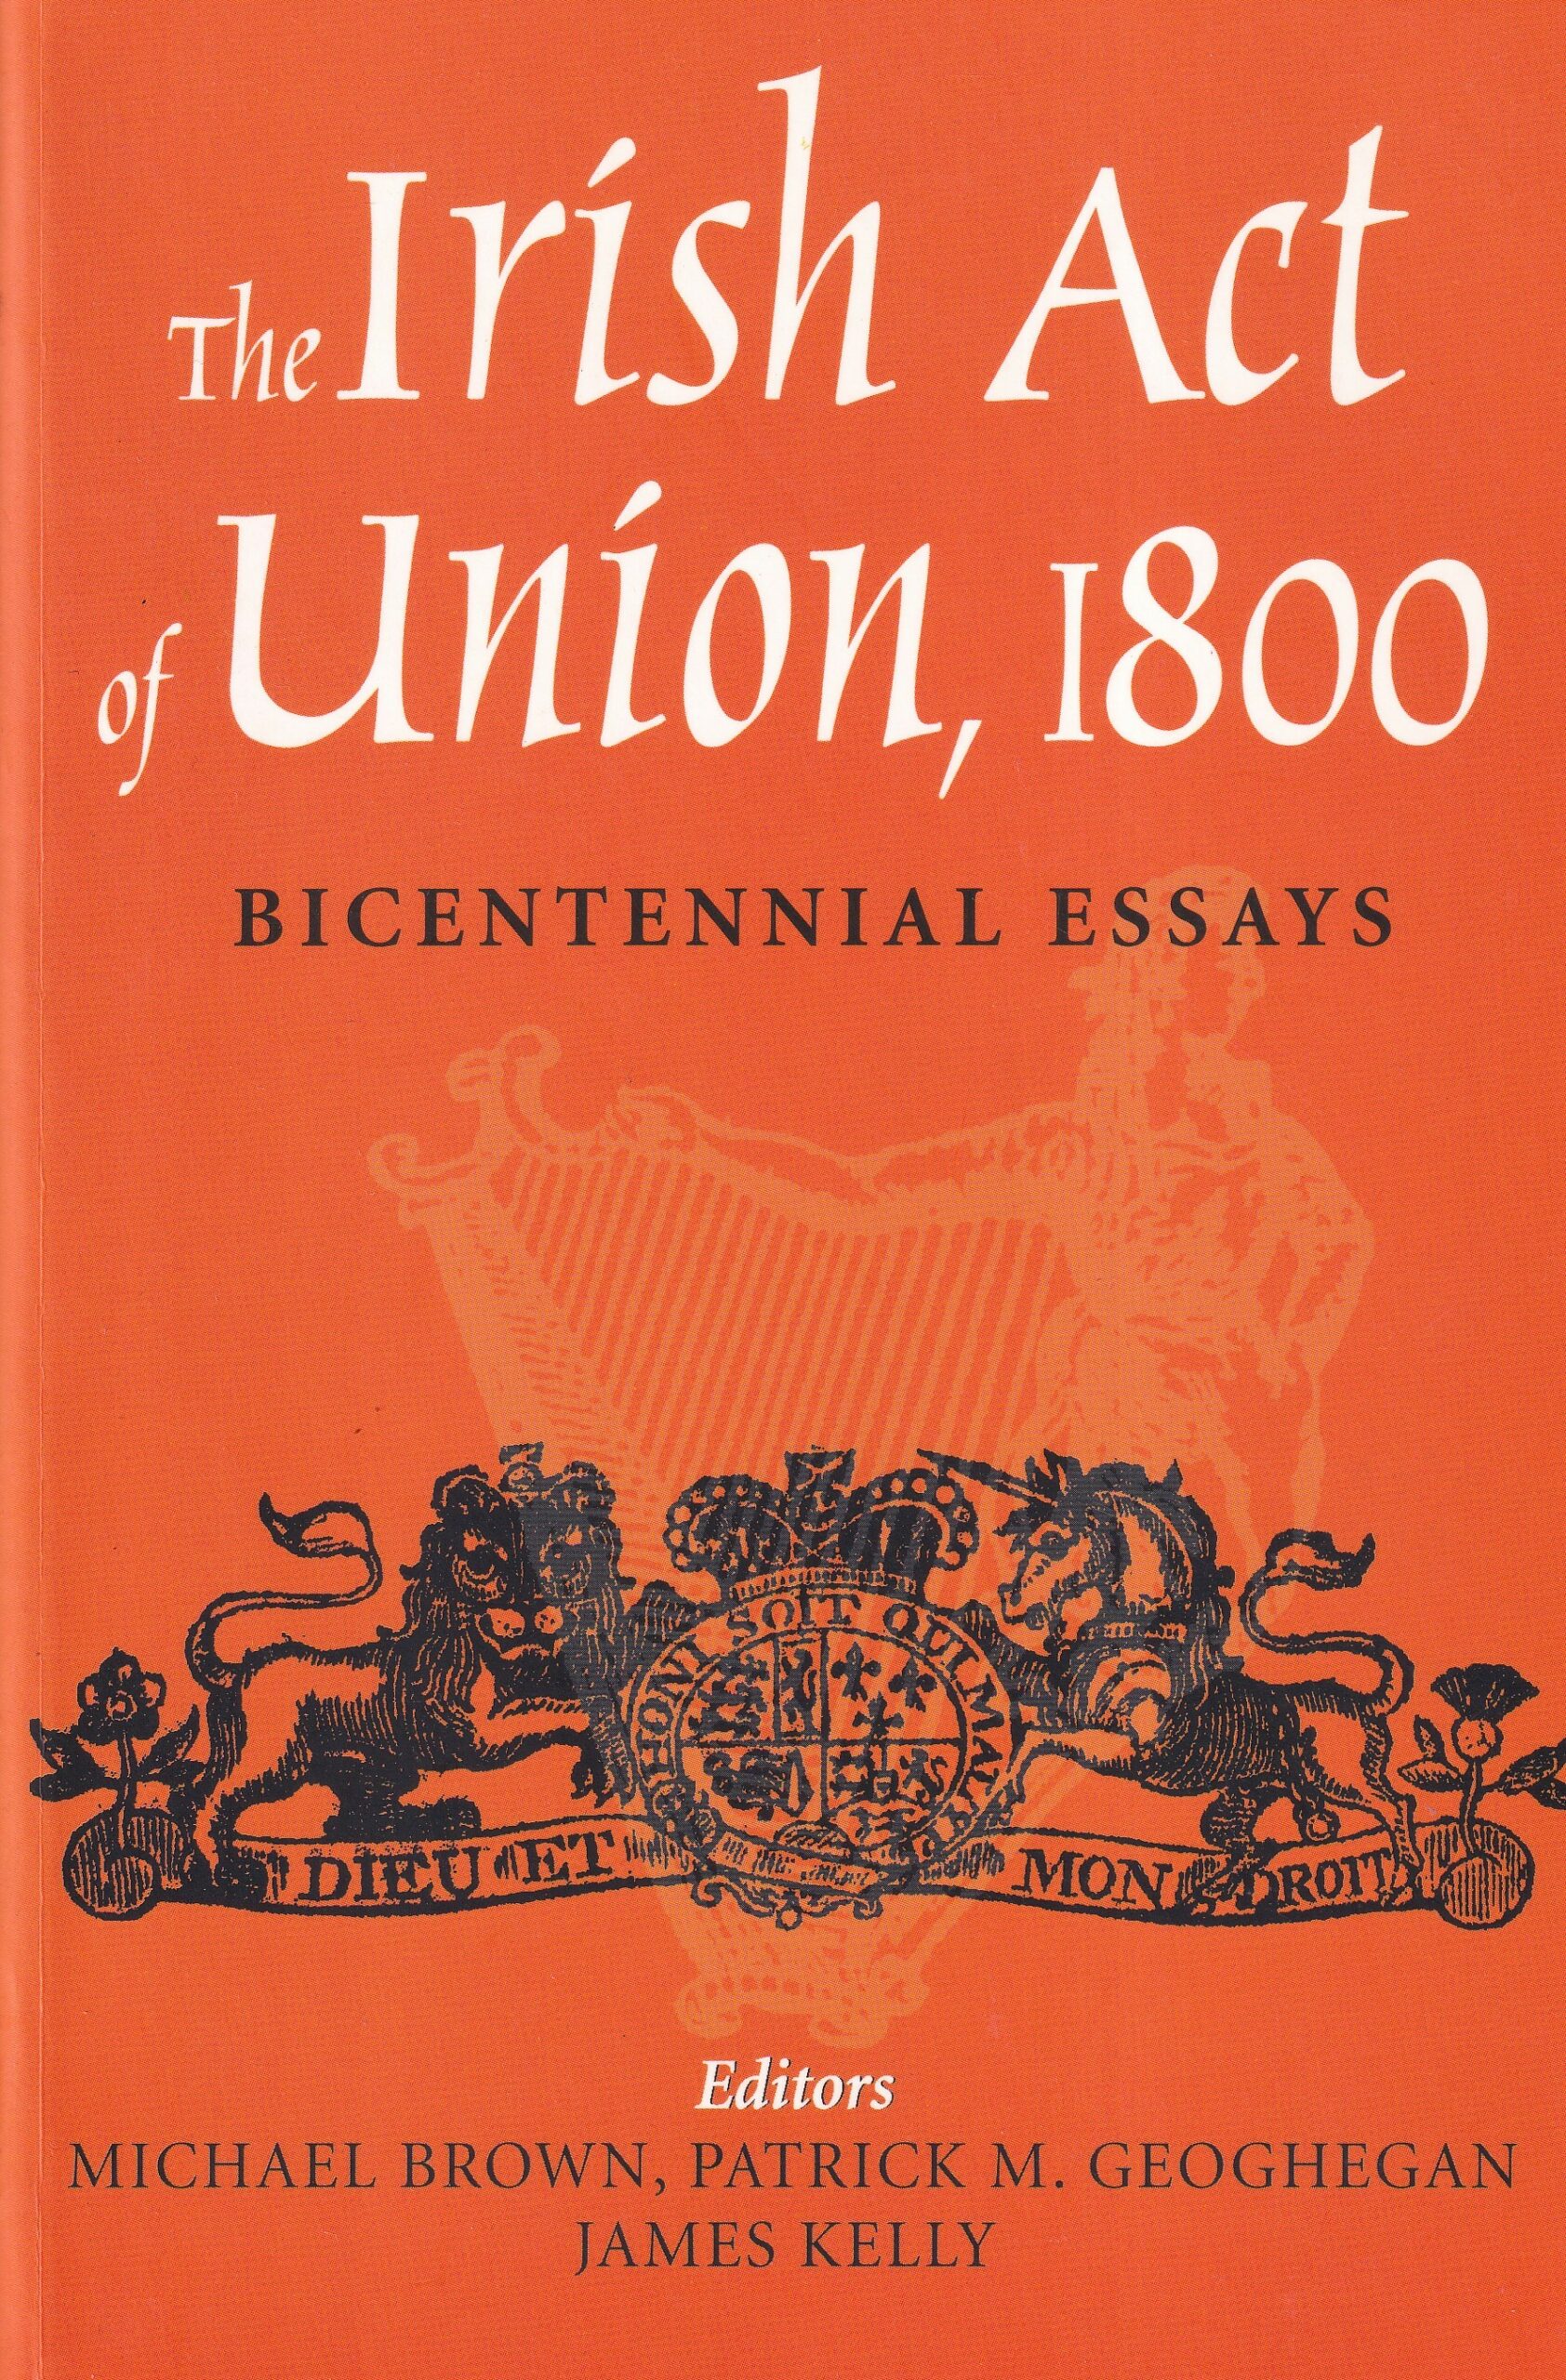 The Irish Act of Union, 1800 : Bicentennial Essays | Michael Brown, Patrick M. Geoghan, James Kelly (eds.) | Charlie Byrne's